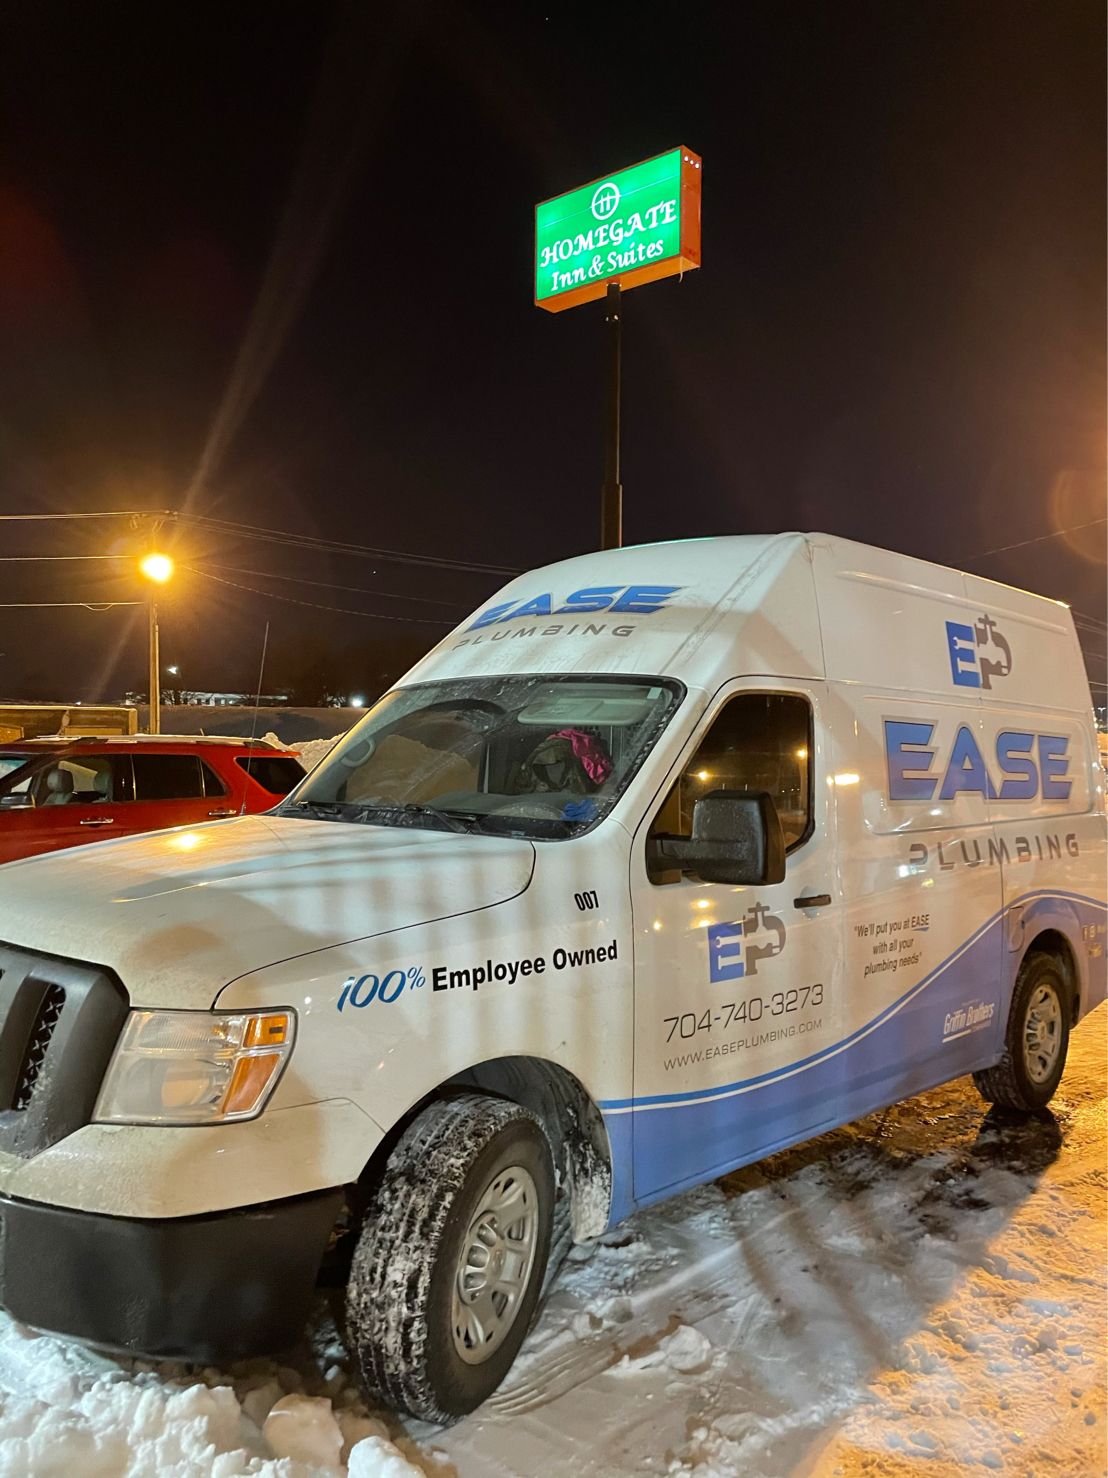 Ease Plumbing and Air